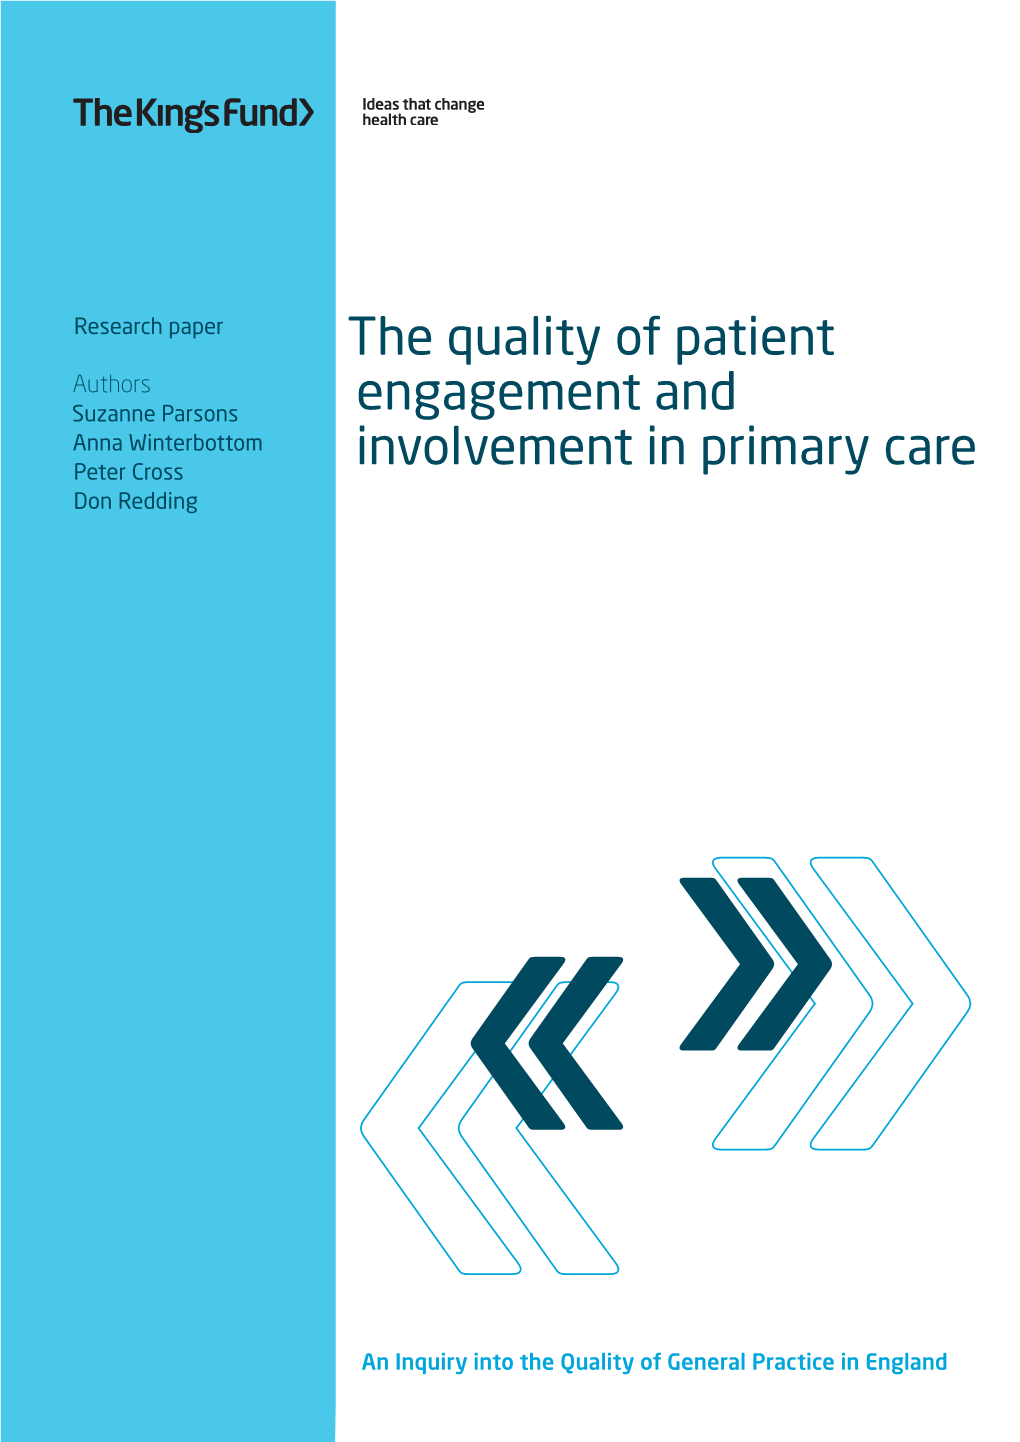 The Quality of Patient Engagement and Involvement in Primary Care